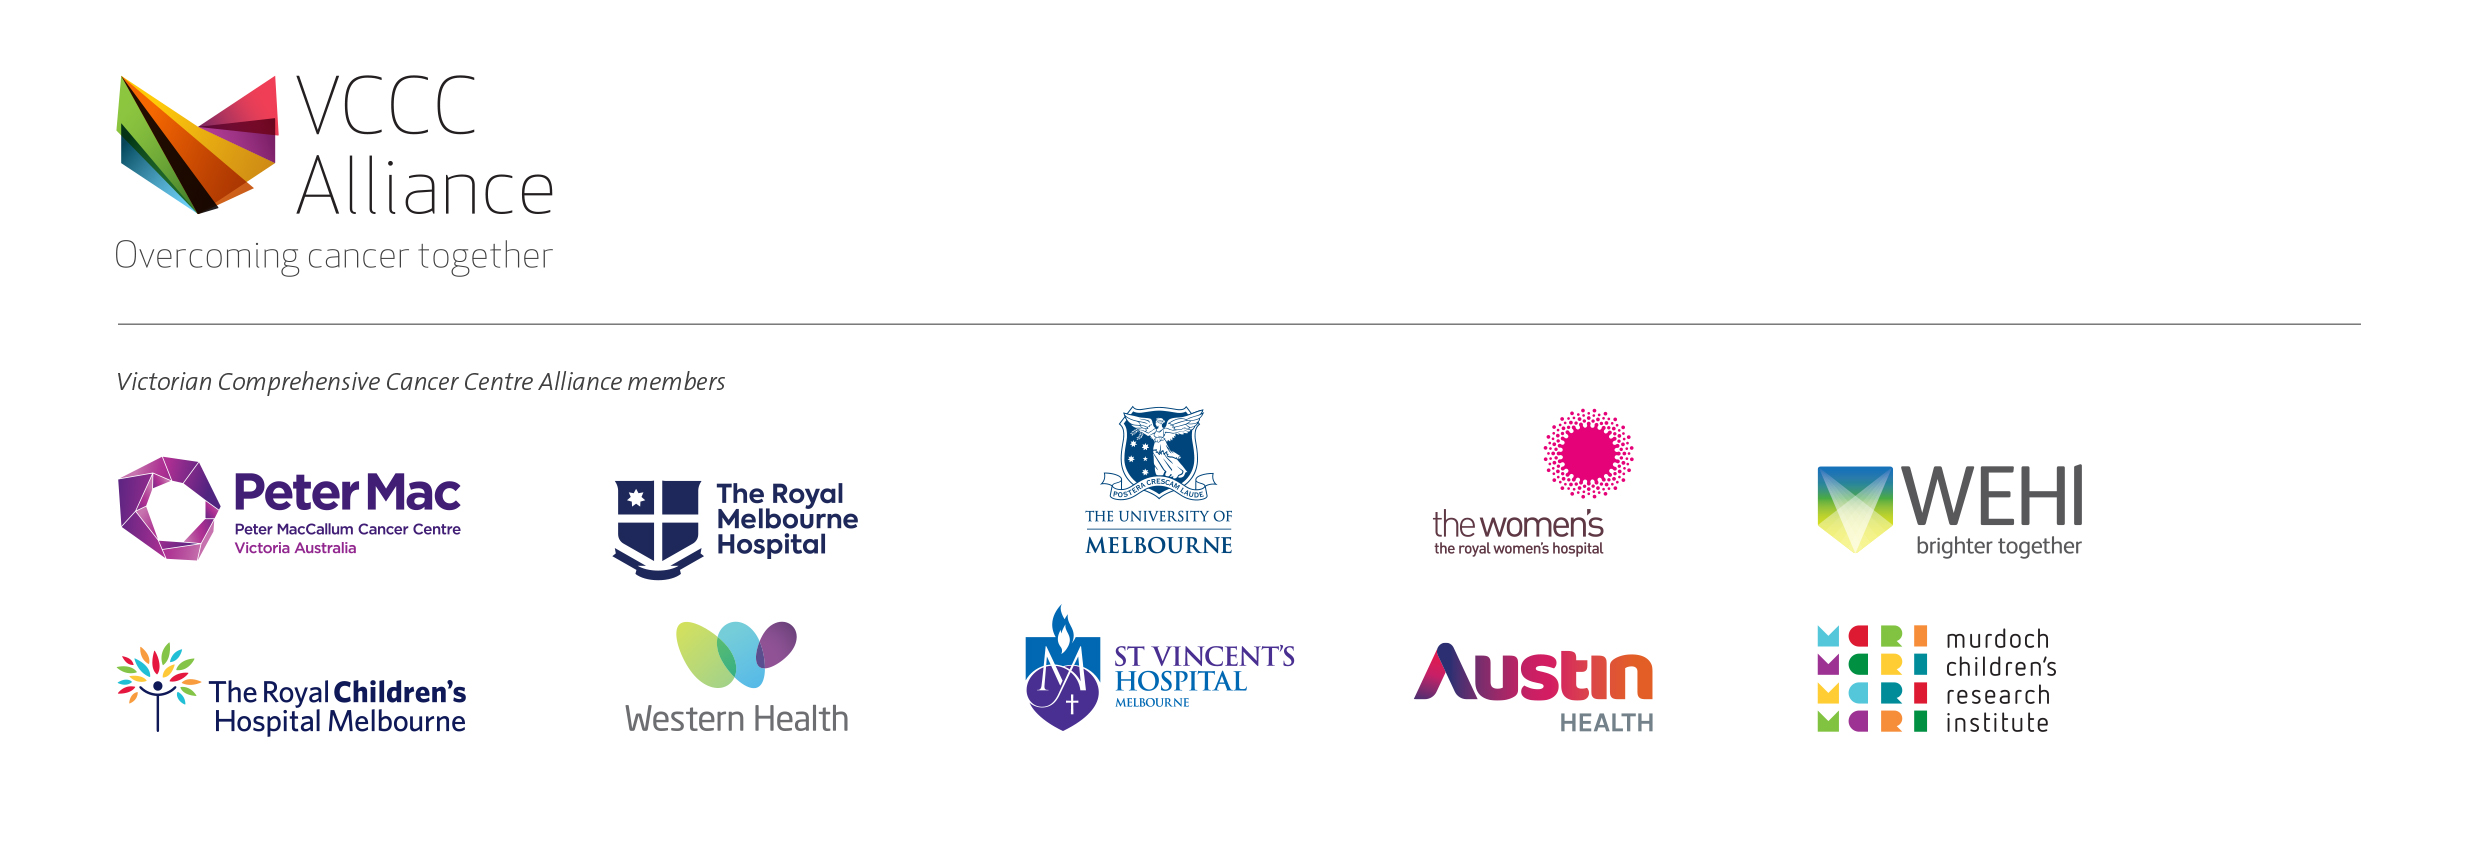 Logos of Peter Mac, RMH, UoM, The Women's, WEHI, RCH, Western Health, St Vincent's Hospital, Austin Health, MCRI